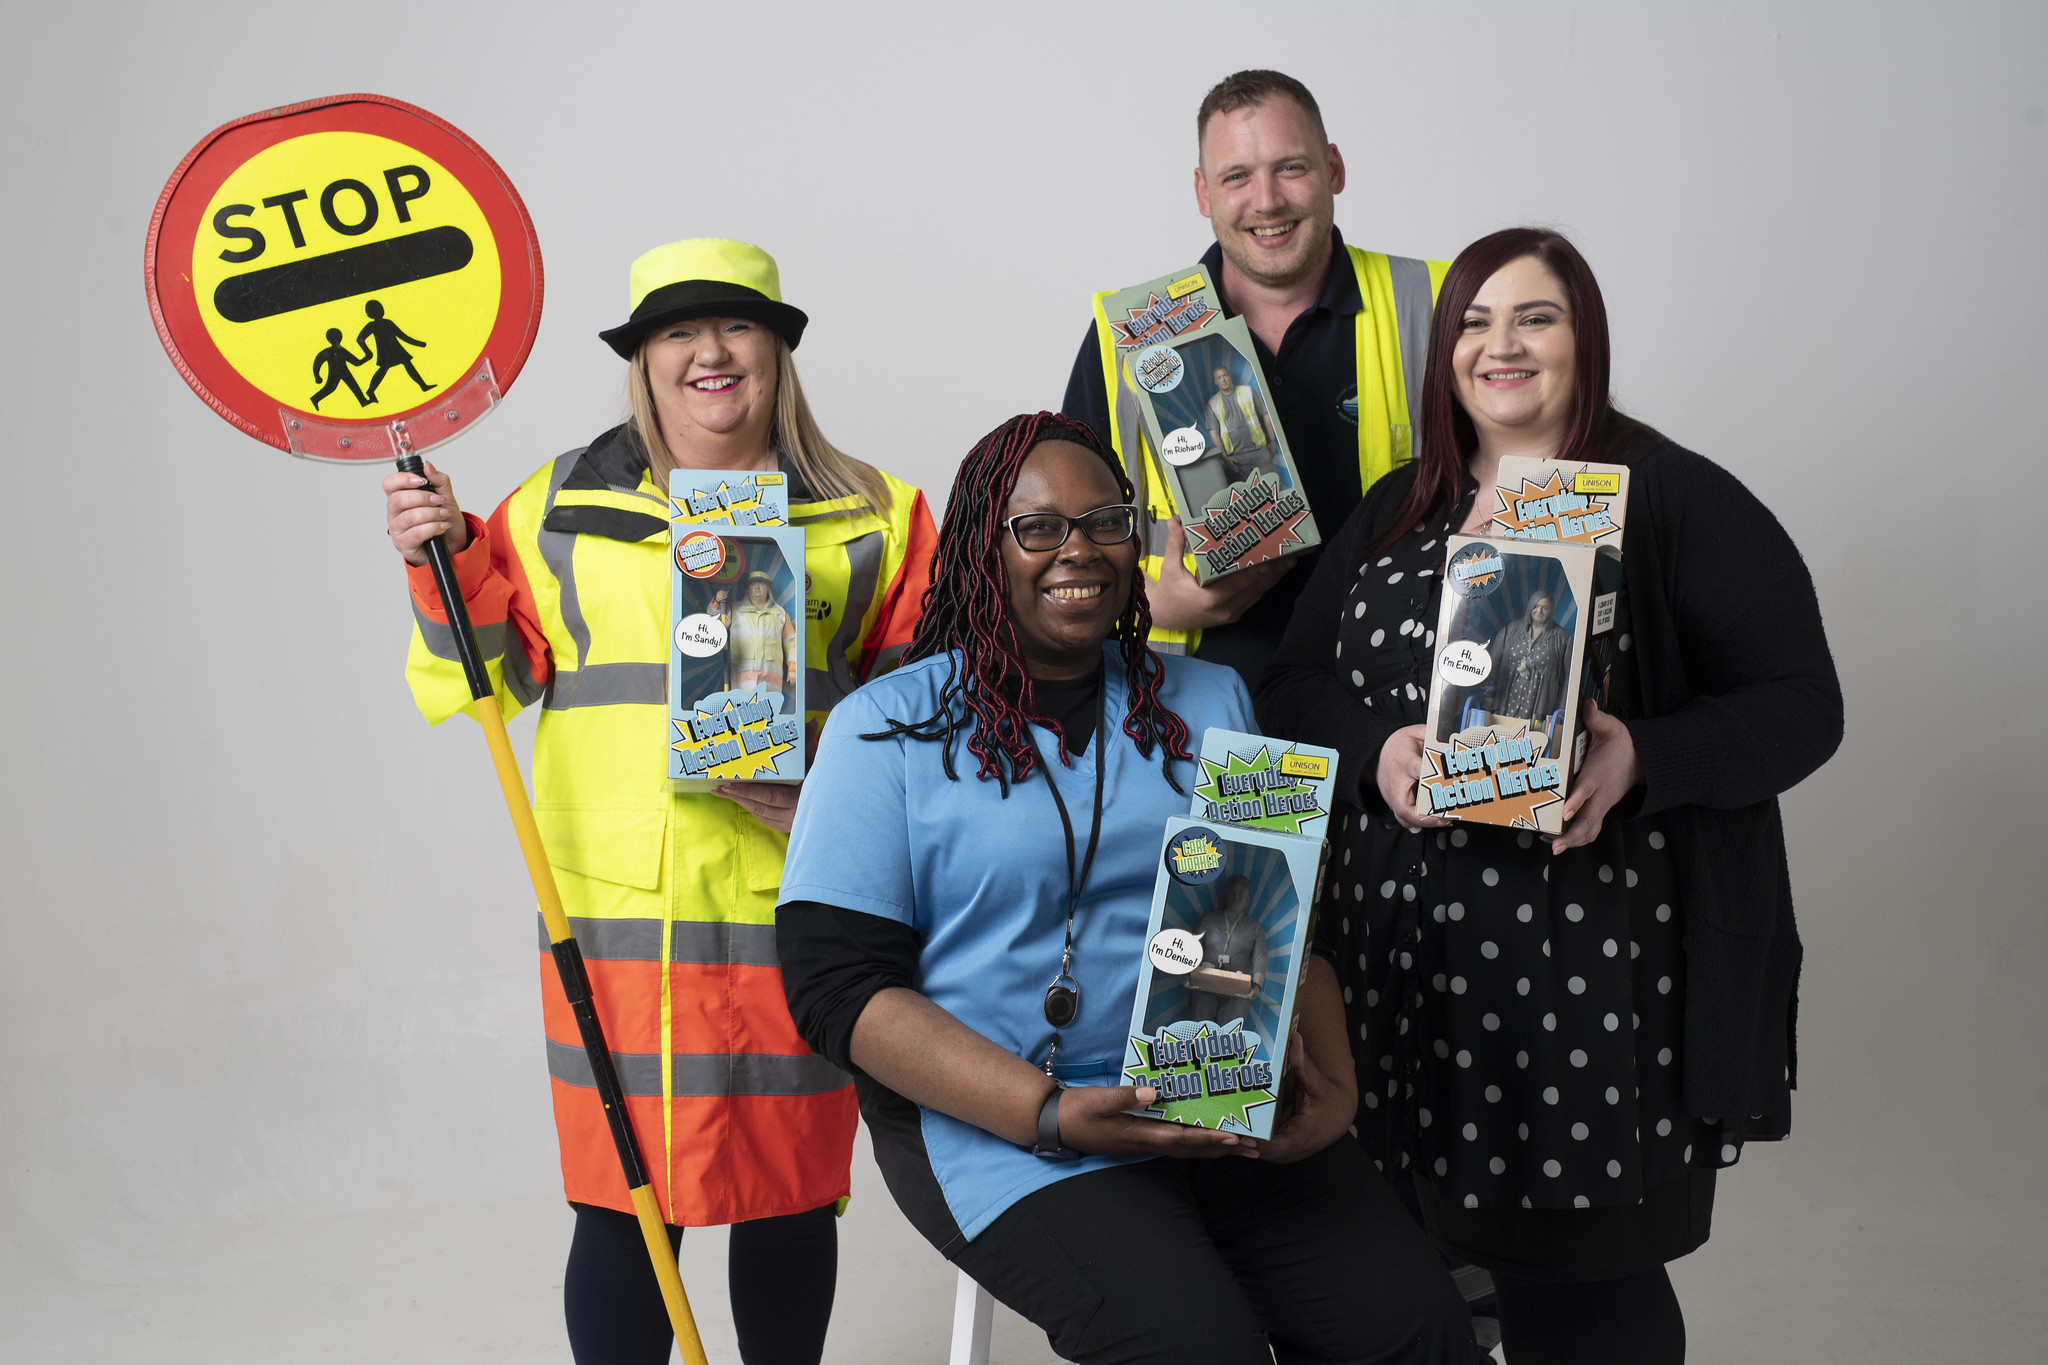 Lollipop lady Sandy Cox, care worker Denise King, refuse collector Richard Brace and librarian Emma Braker with their action figures 